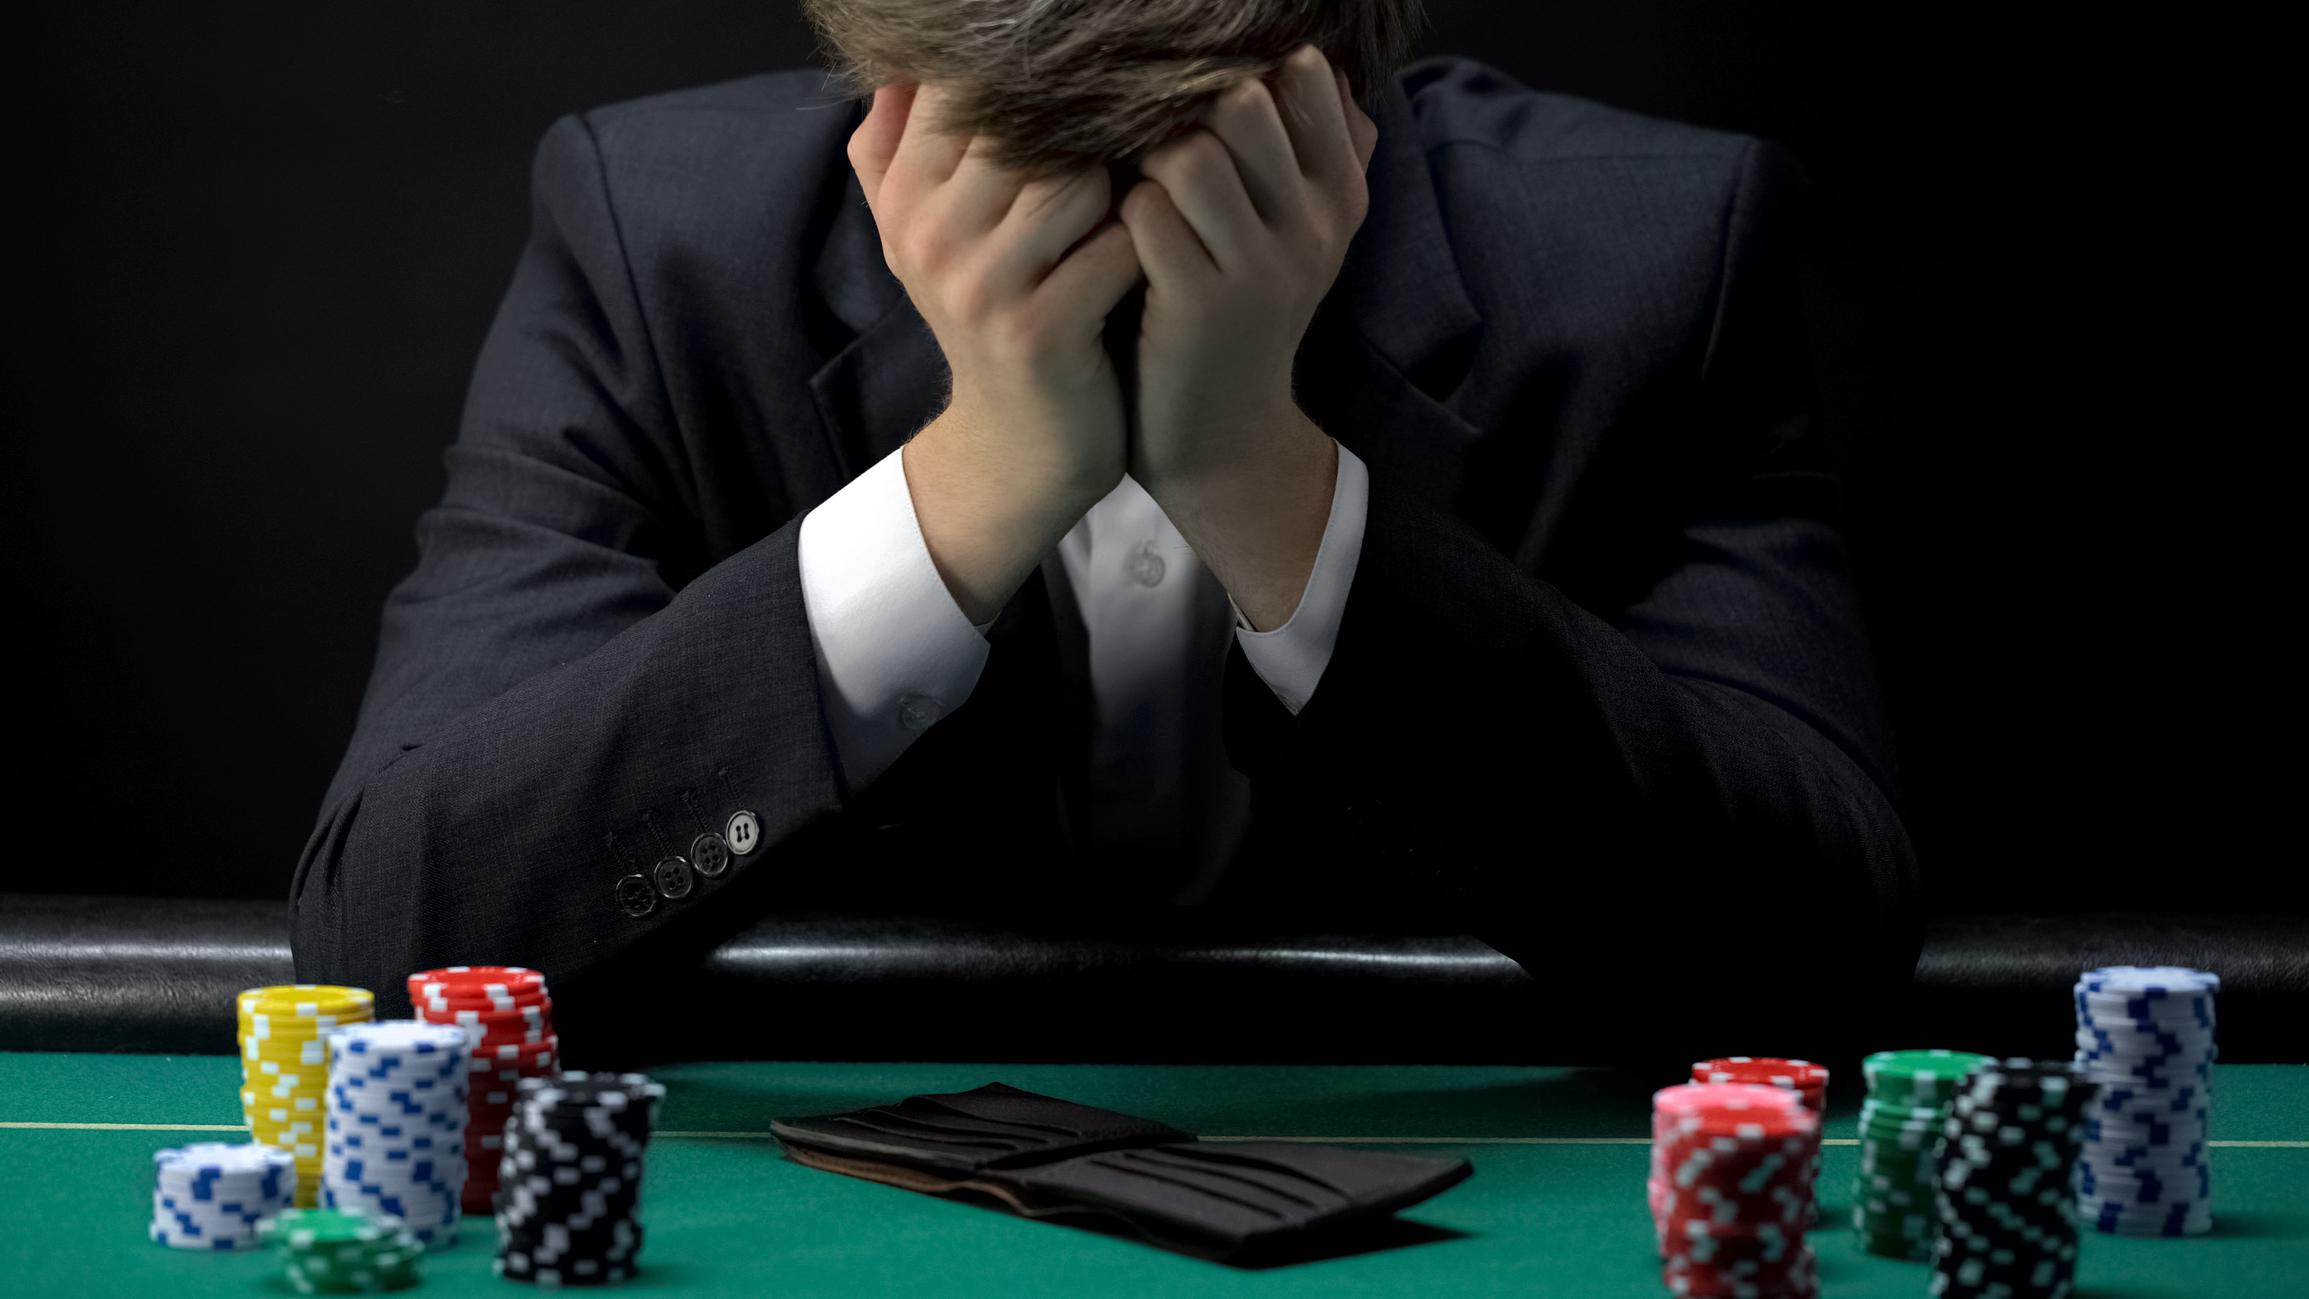 Gambling industry not doing enough to protect problem gamblers and children  | Lancaster University